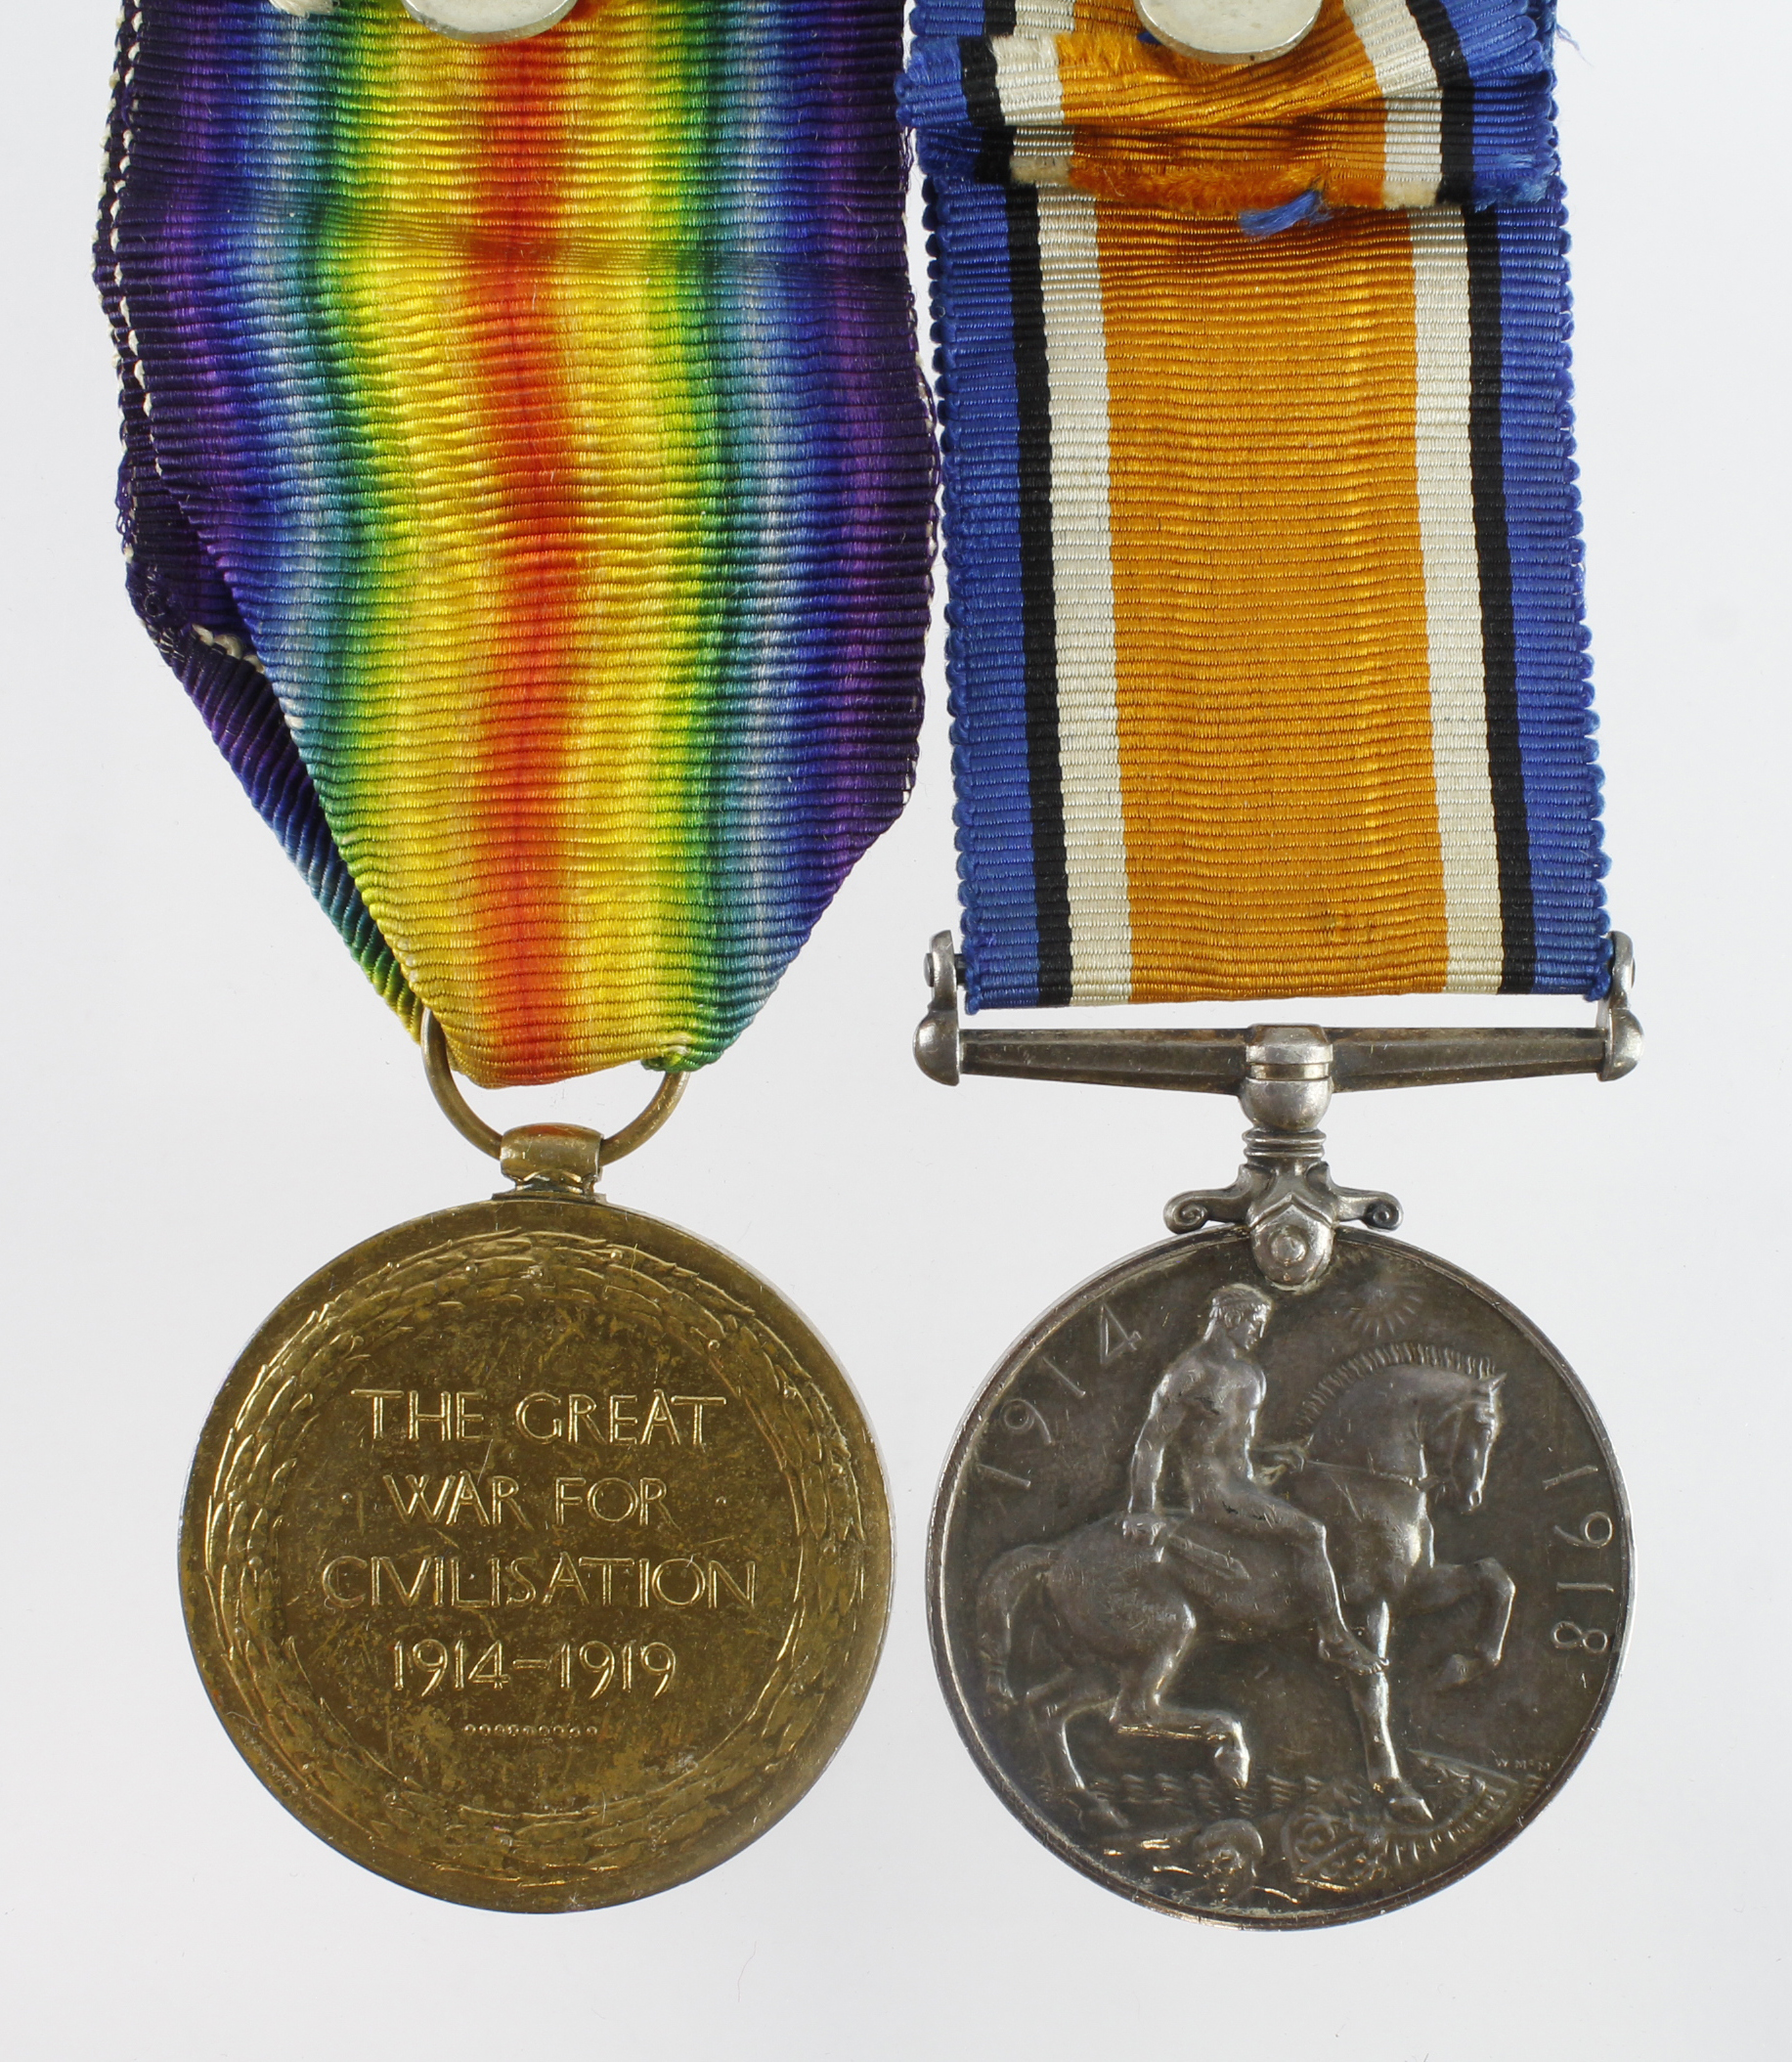 BWM & Victory Medal (4748 Pte F B Day, Camb R) discharged, Wounds. Vendor states lived High St, - Image 2 of 2